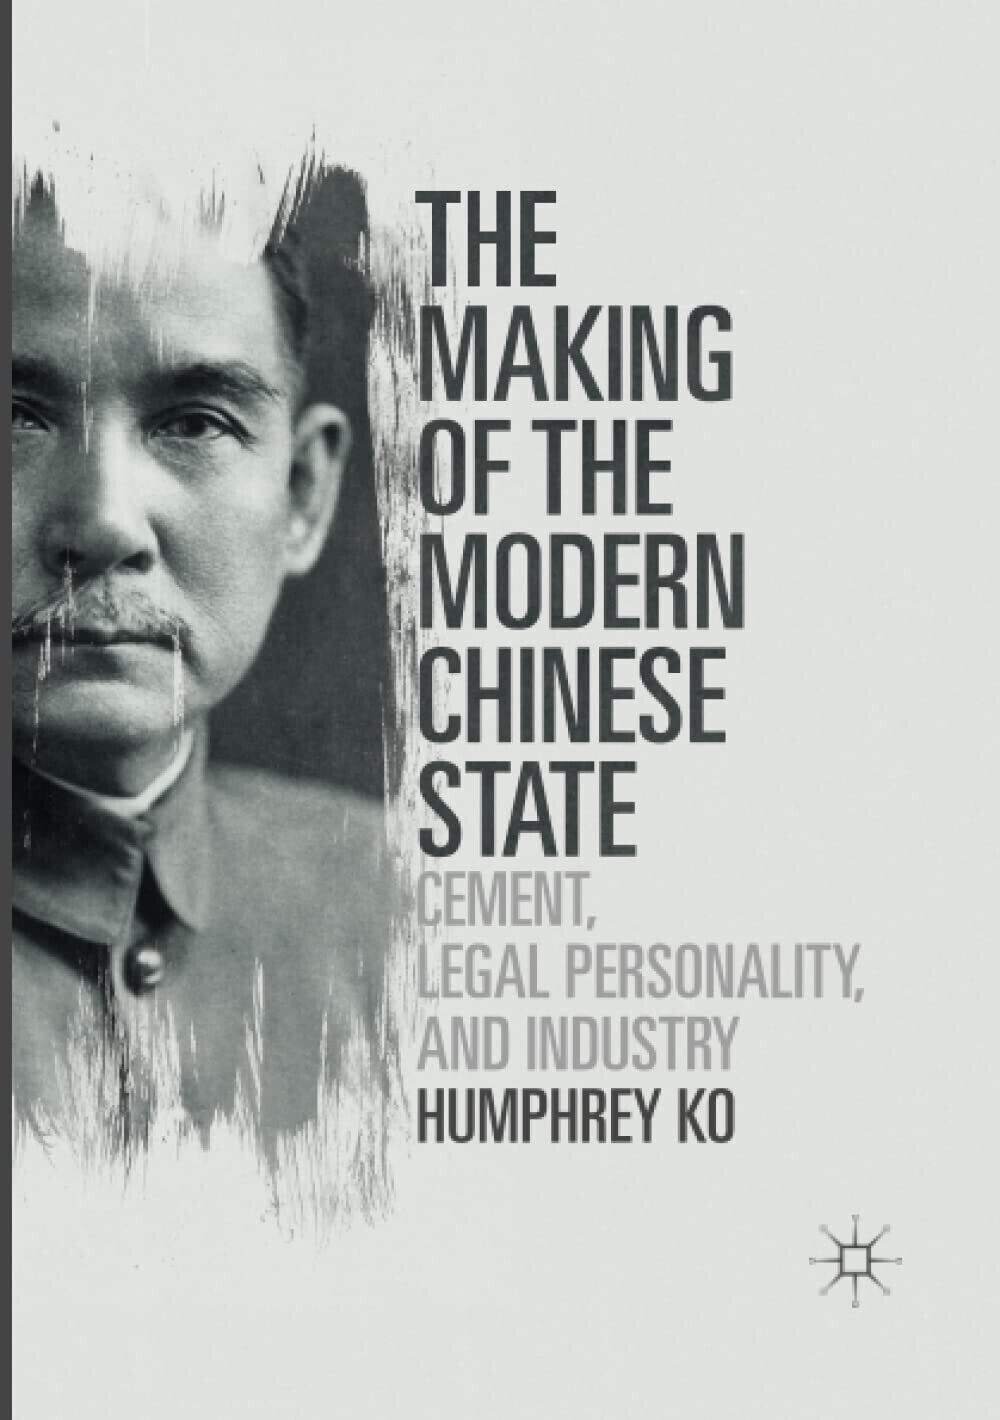 The Making of the Modern Chinese State - Humphrey Ko - Palgrave, 2018